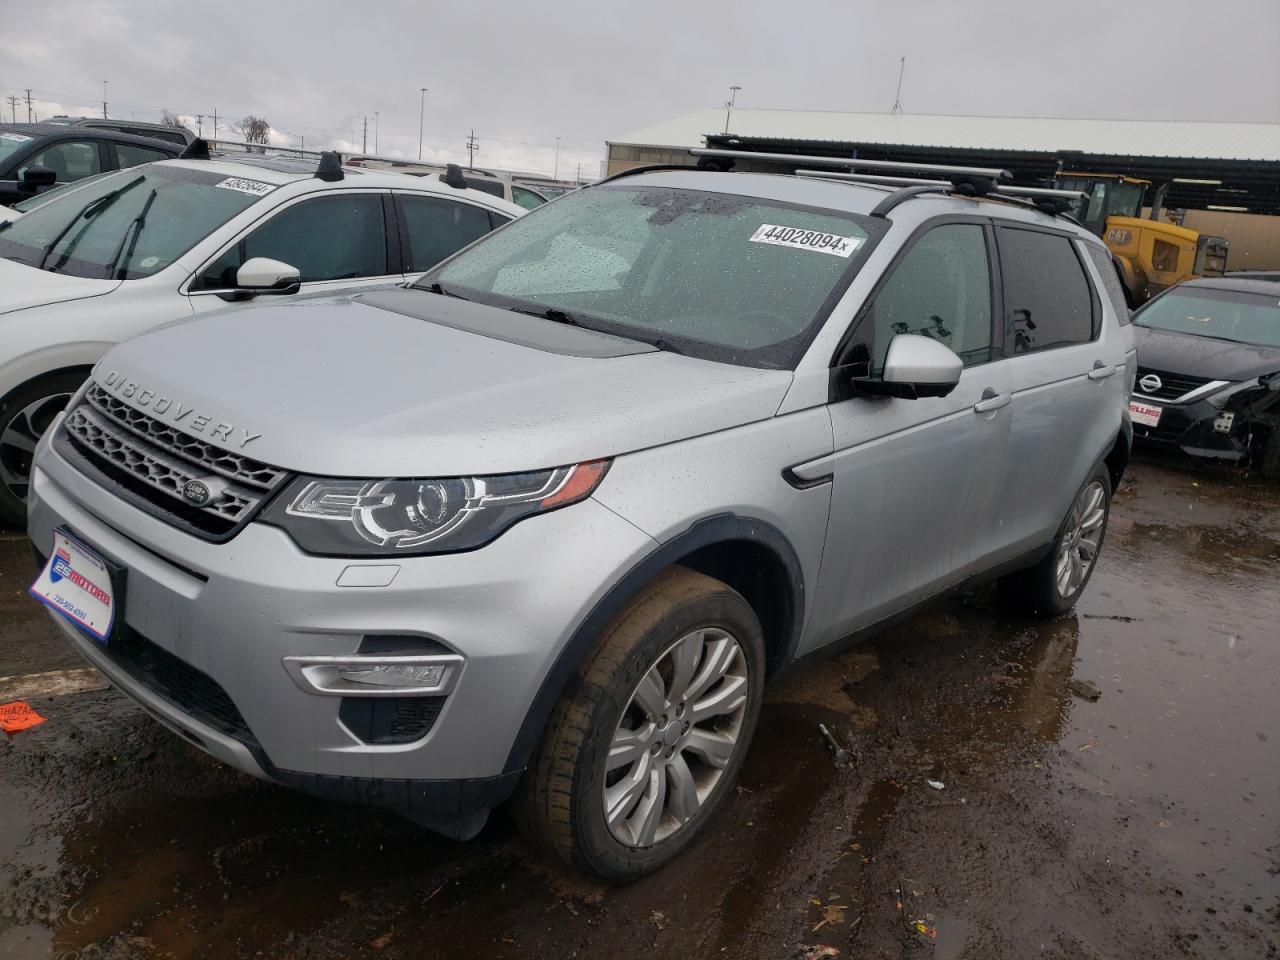 VIN: SALCT2BG2FH540950 - land rover discovery